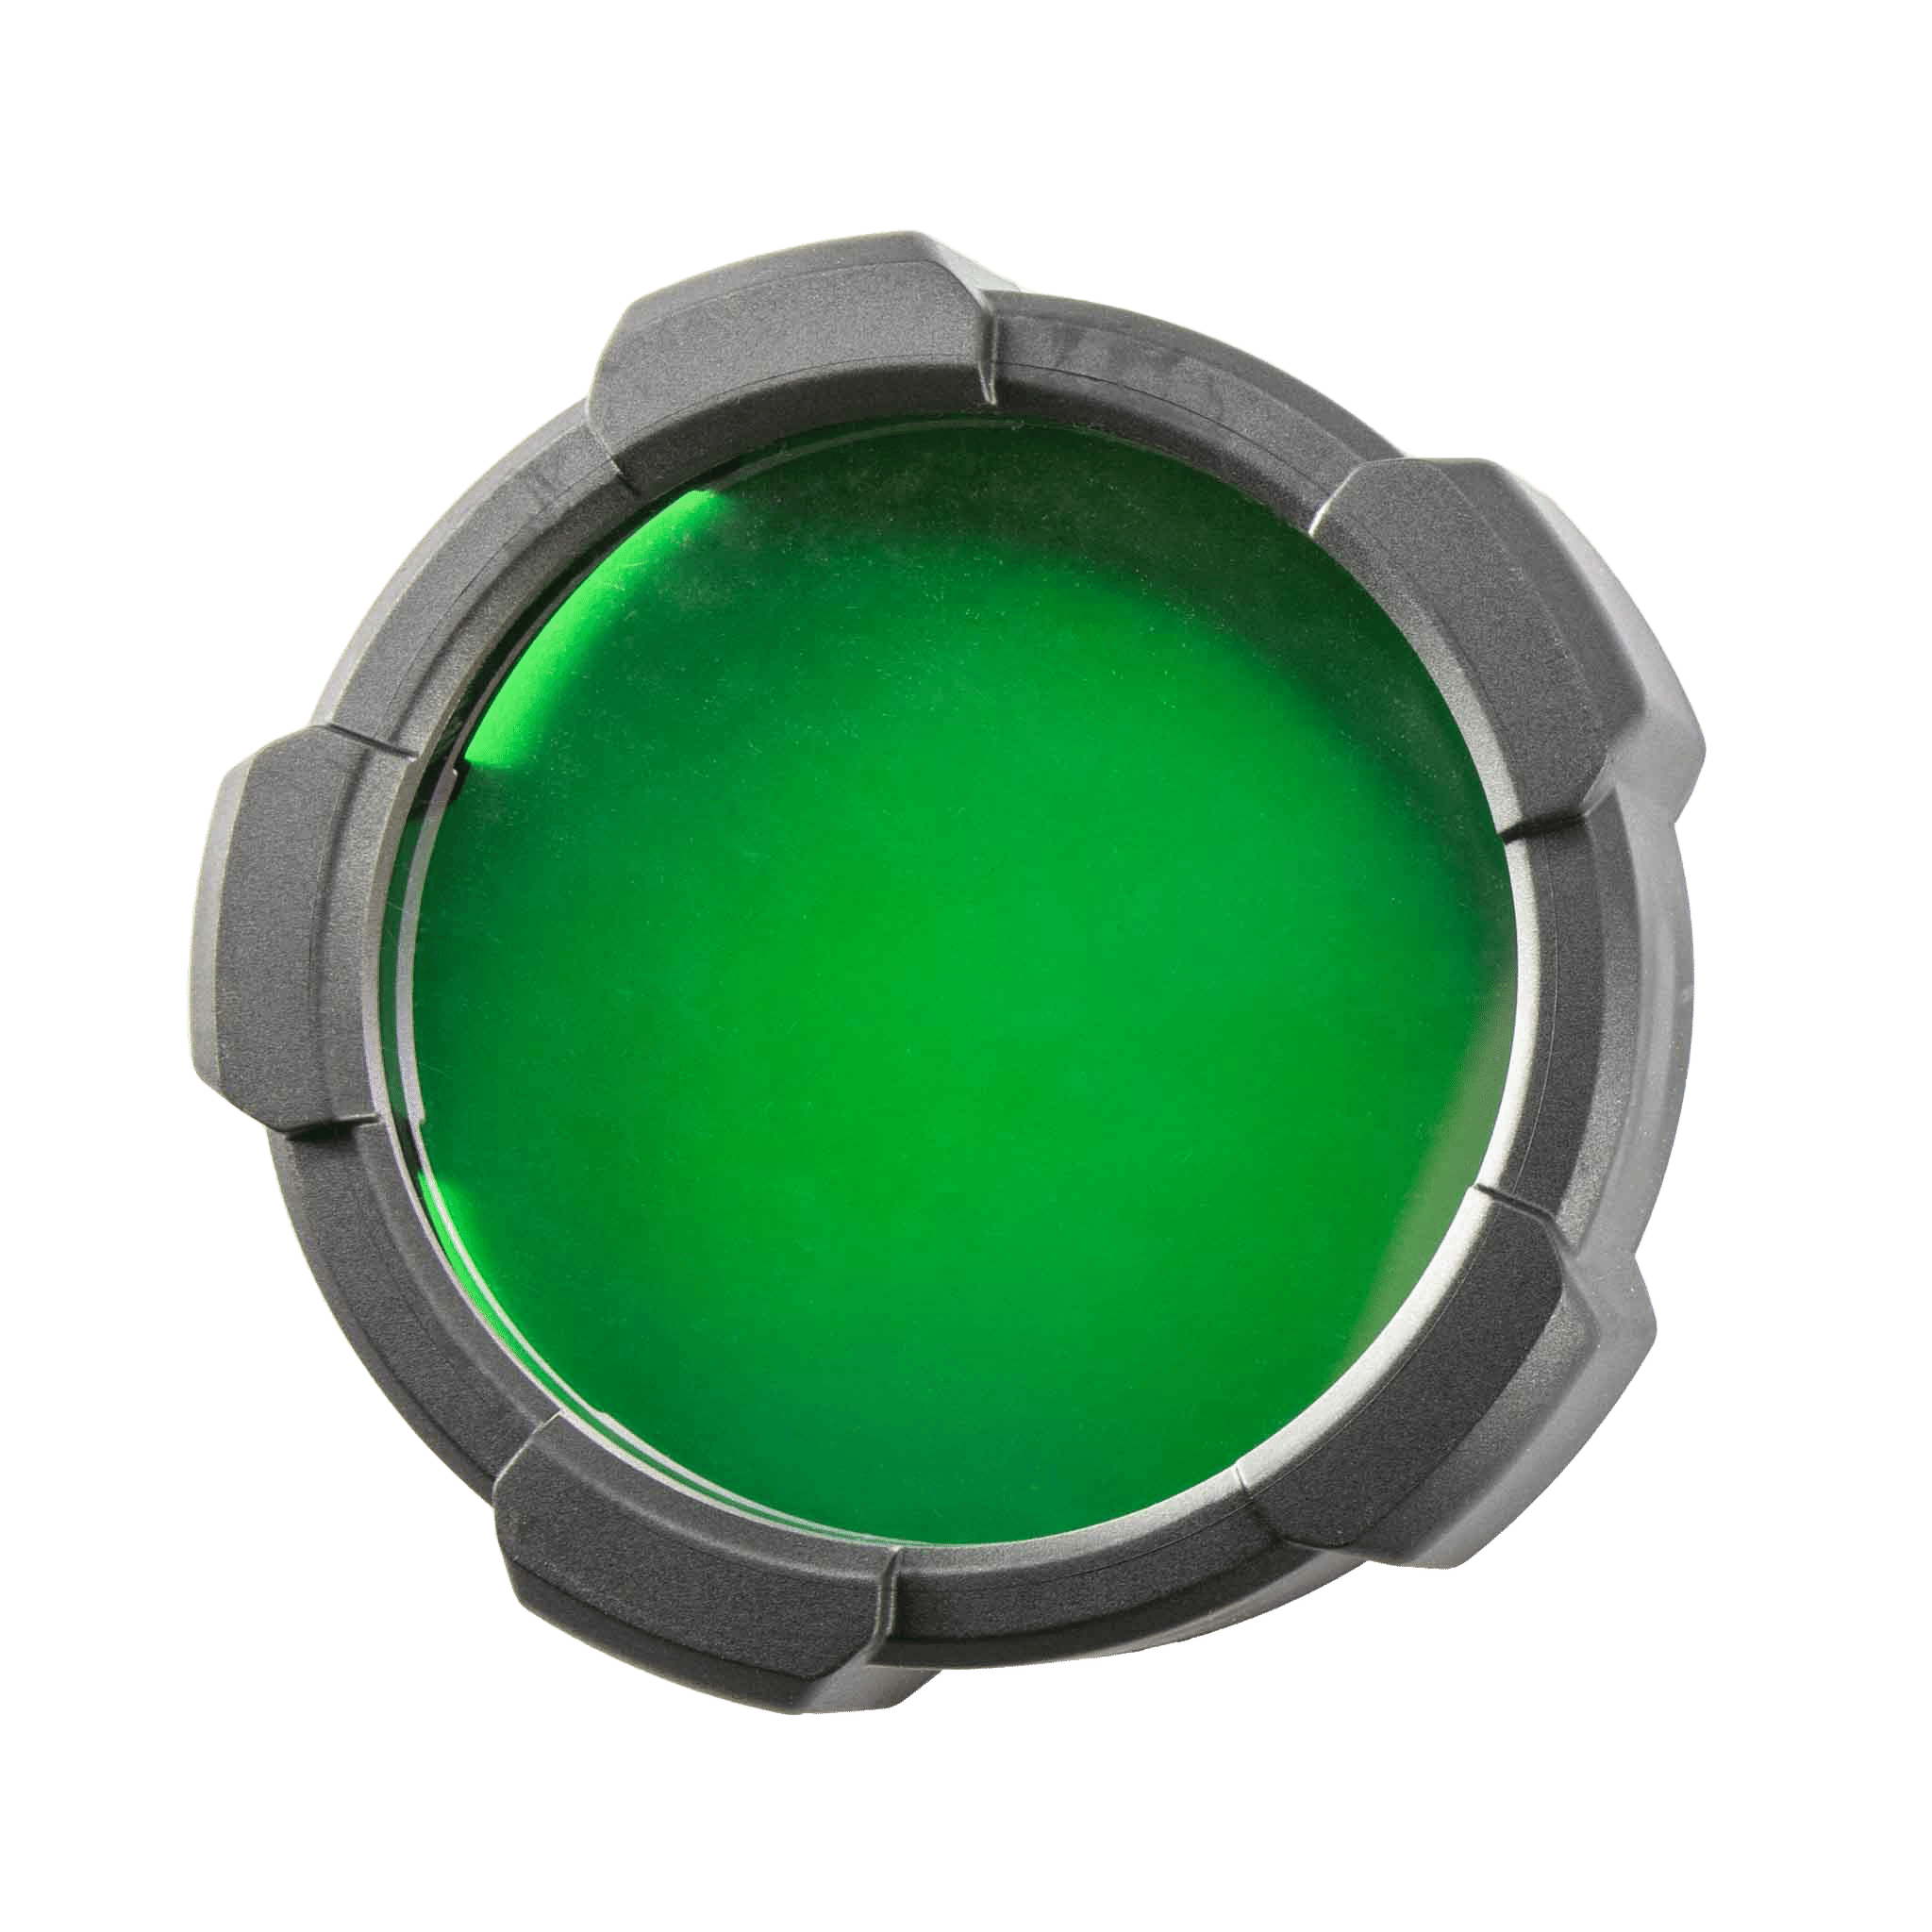 ColourFilterGreen85-5mm.png